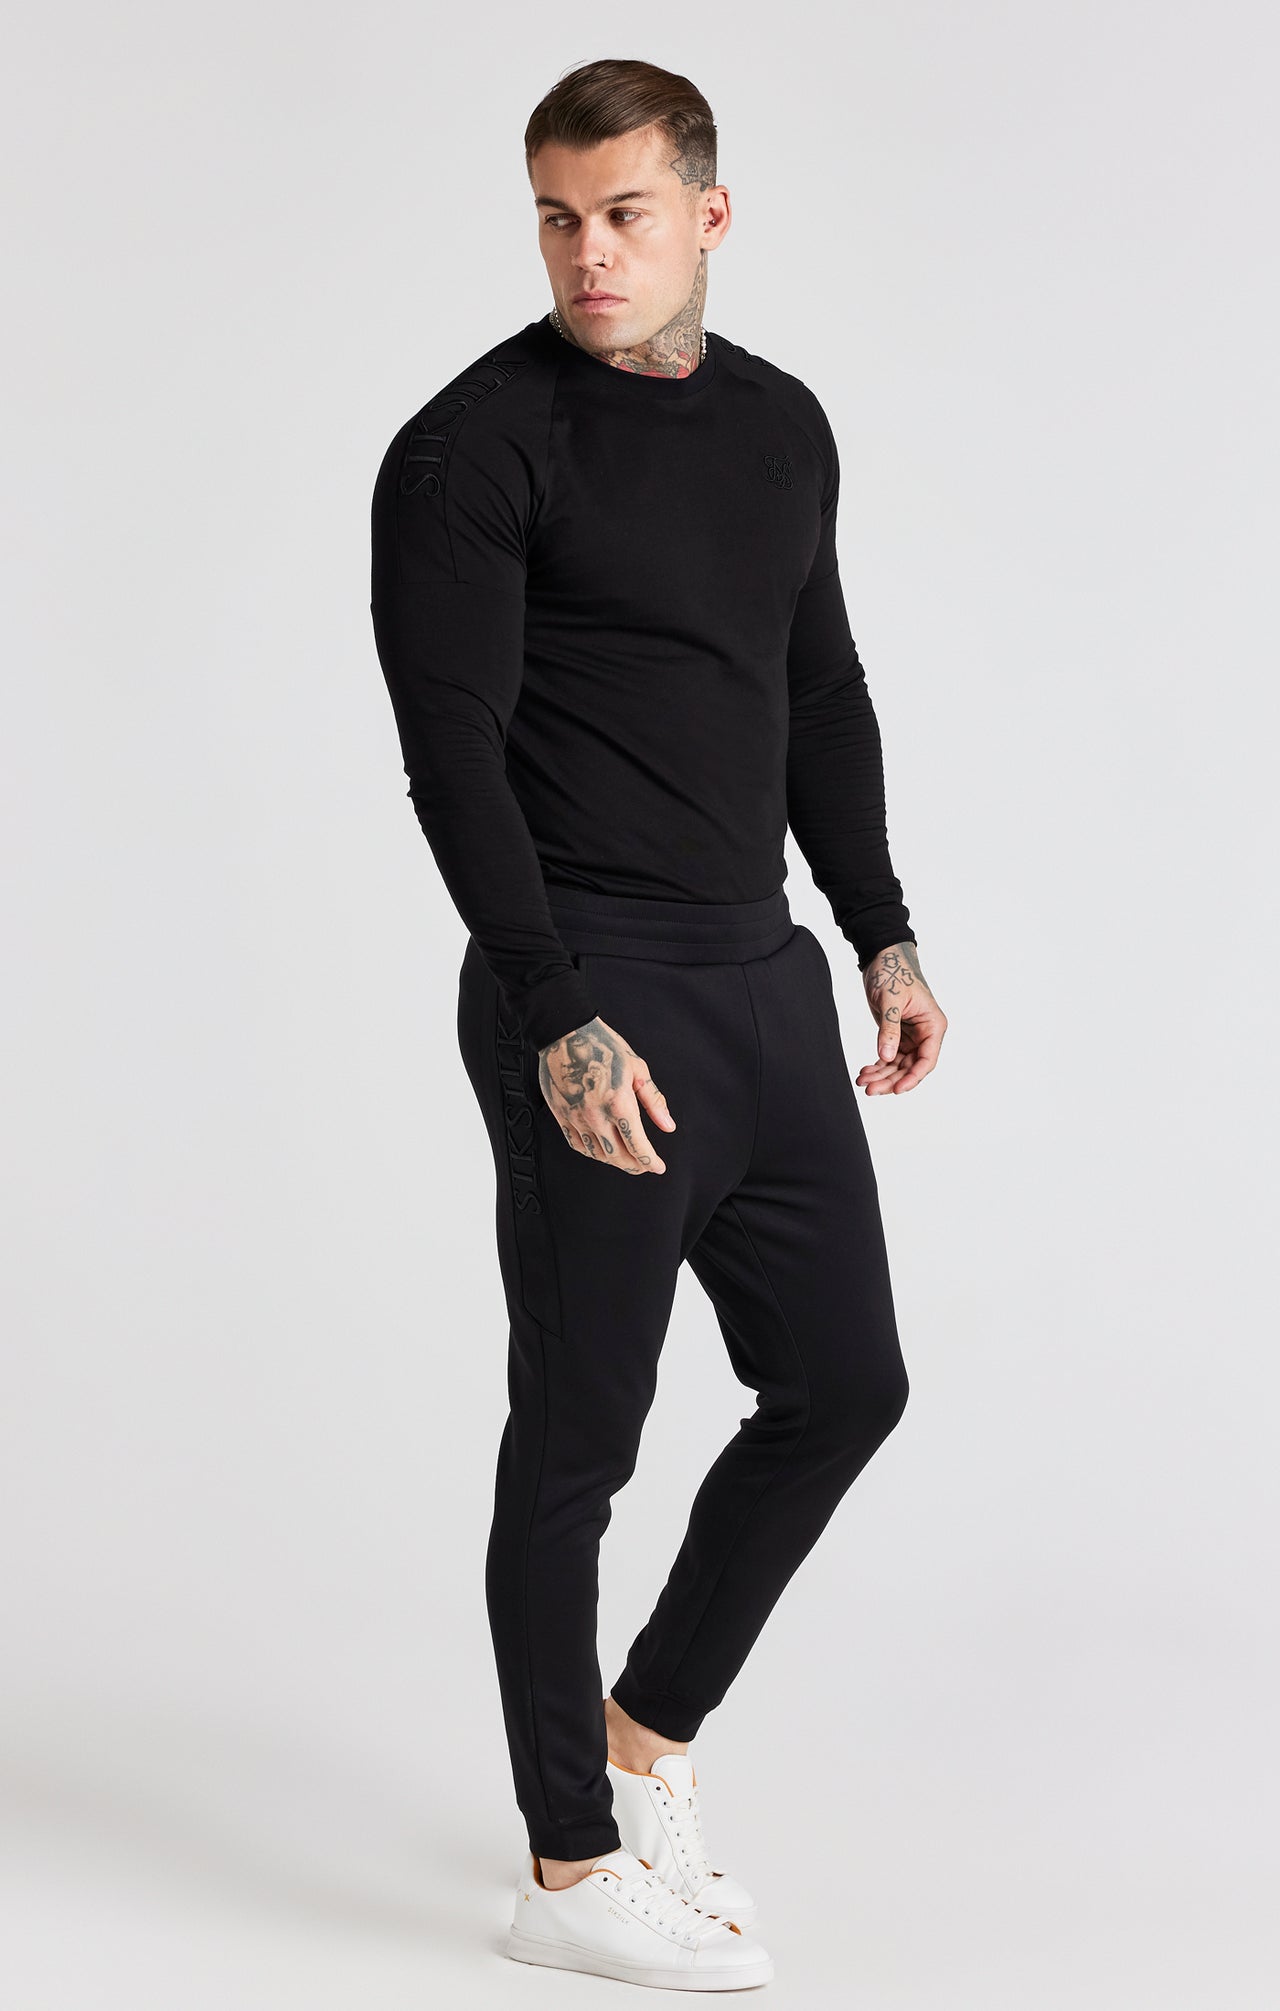 Black Panel Muscle Fit T-Shirt (3)